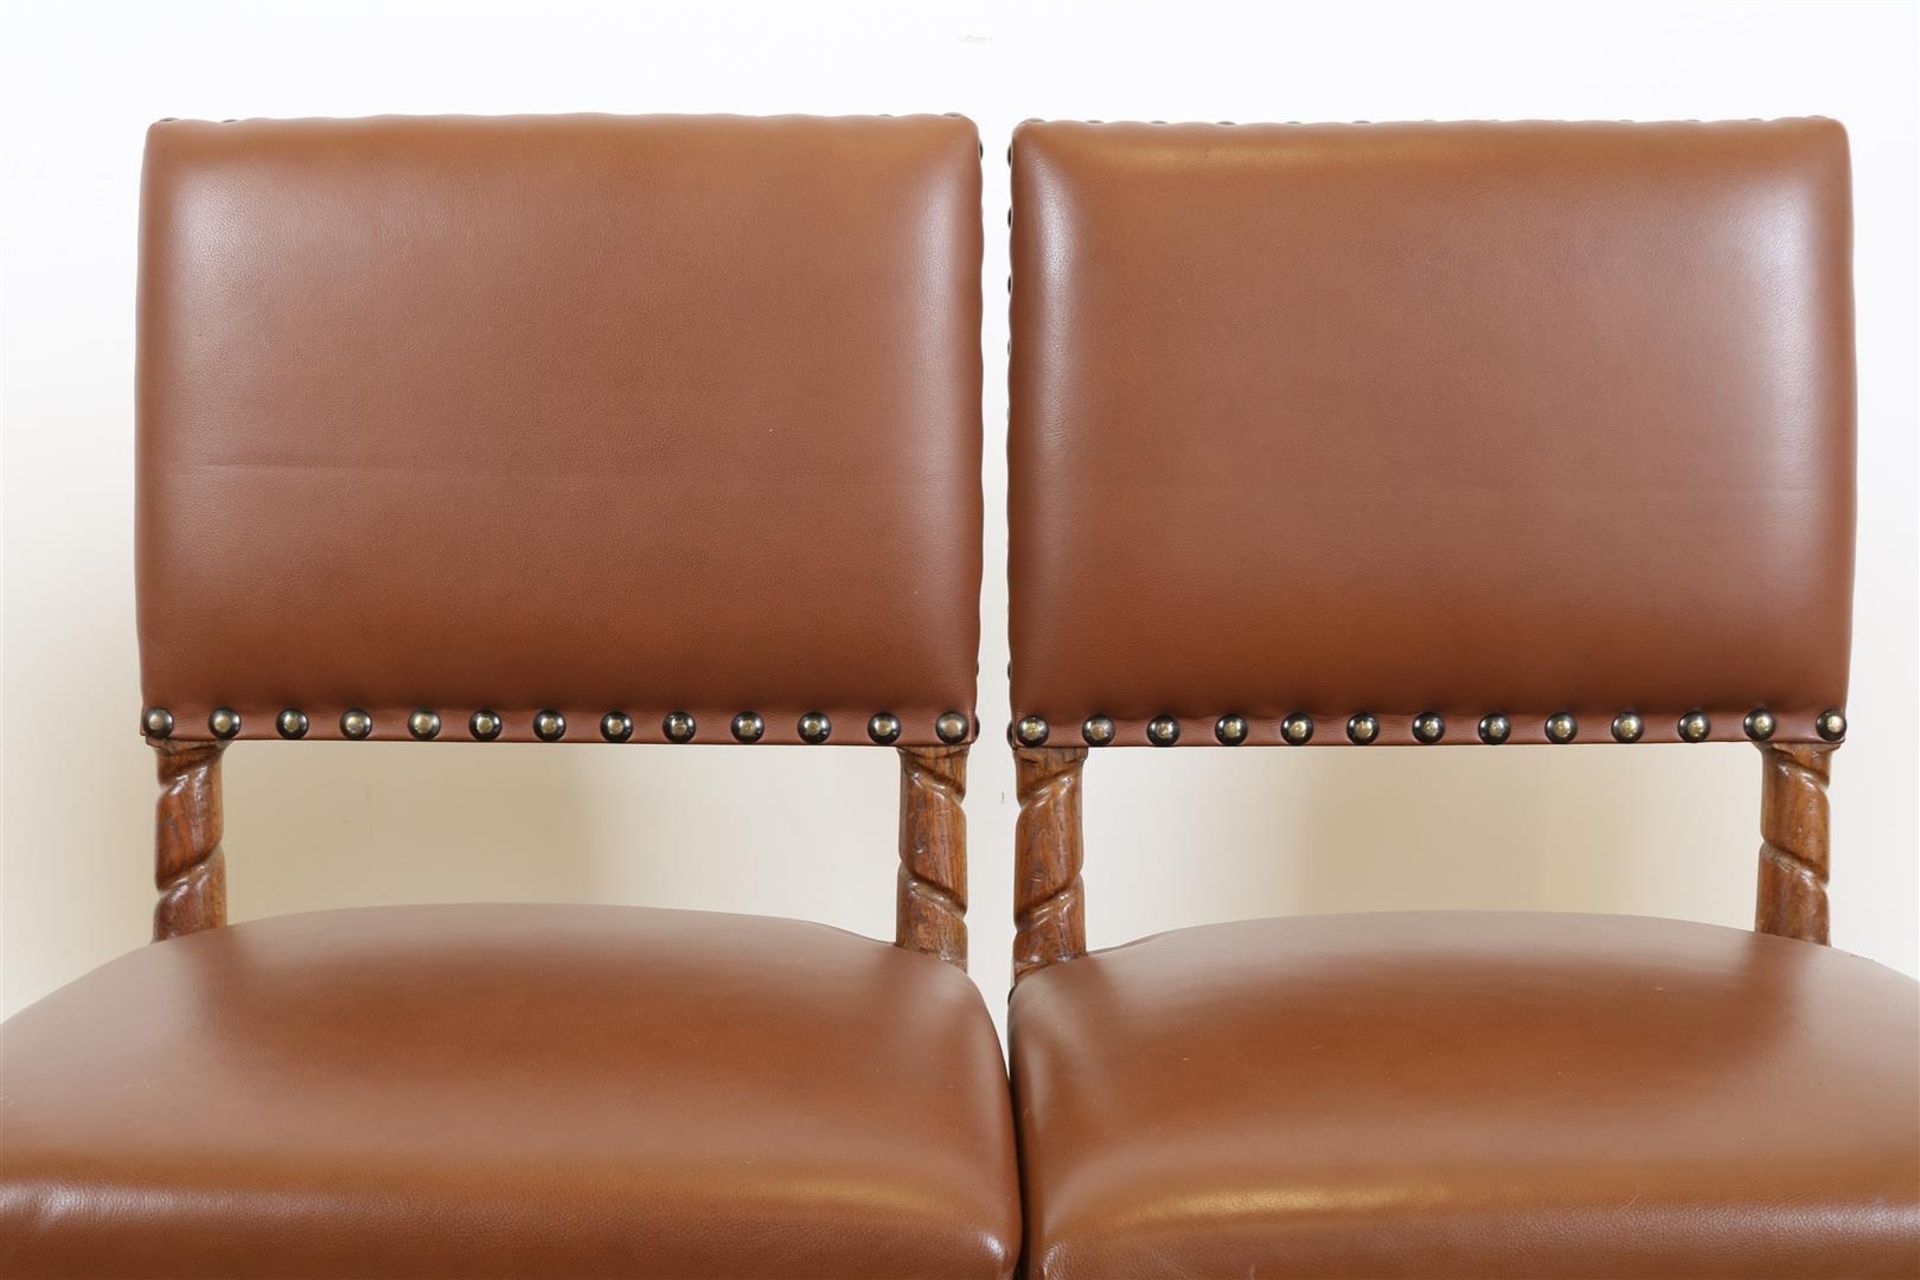 Series of 4 oak Renaissance-style chairs upholstered in brown leather. - Image 2 of 6